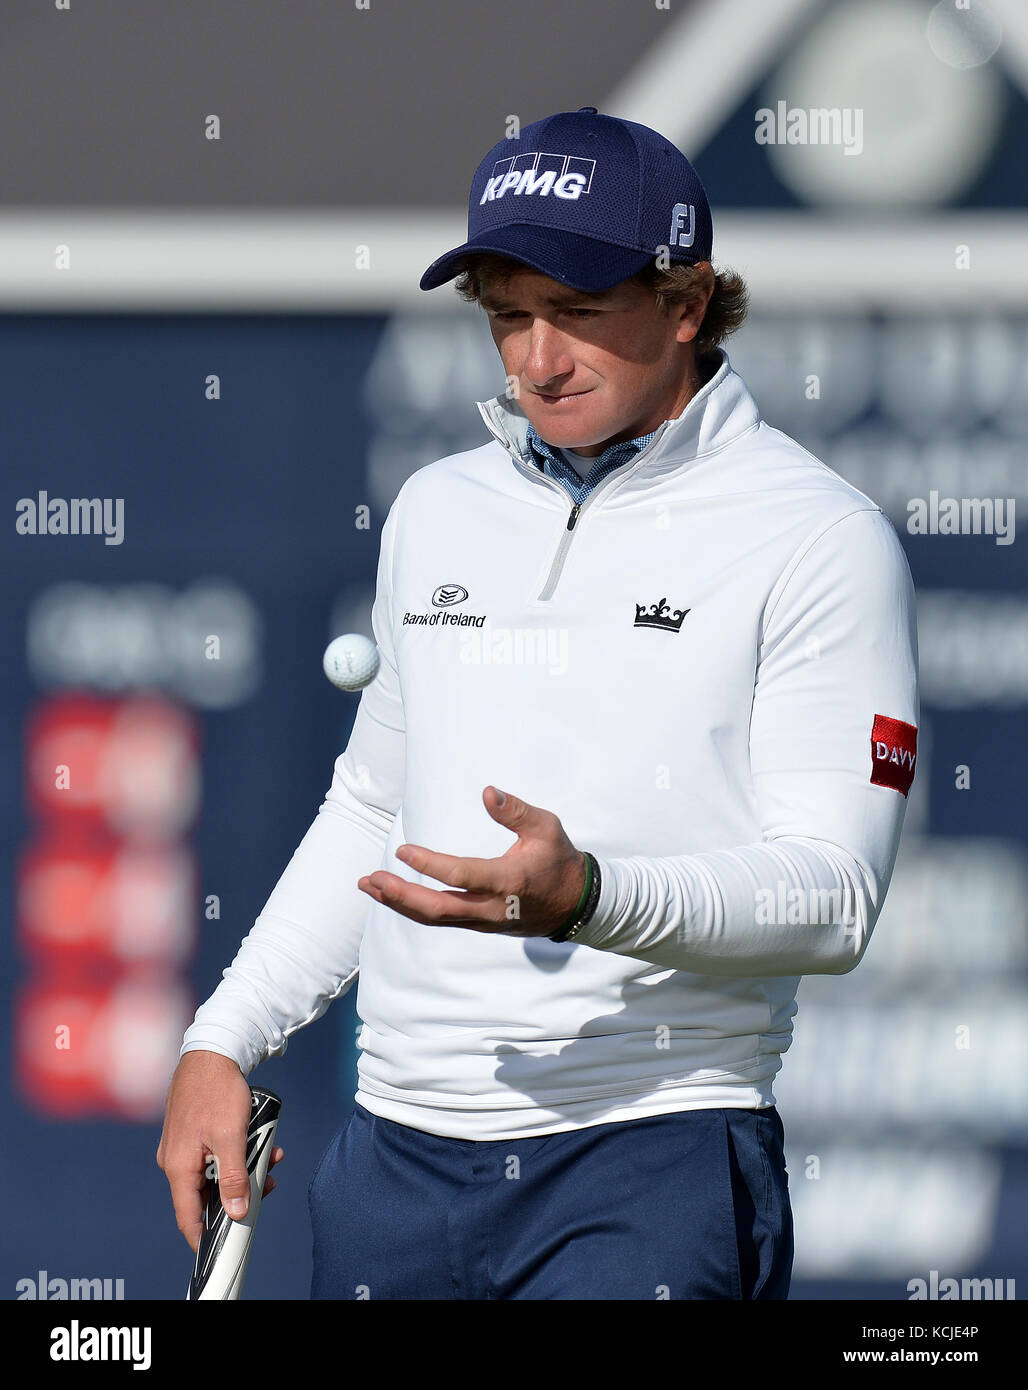 Ireland's Paul Dunne during day one of the Alfred Dunhill Links Championship at St Andrews. Stock Photo